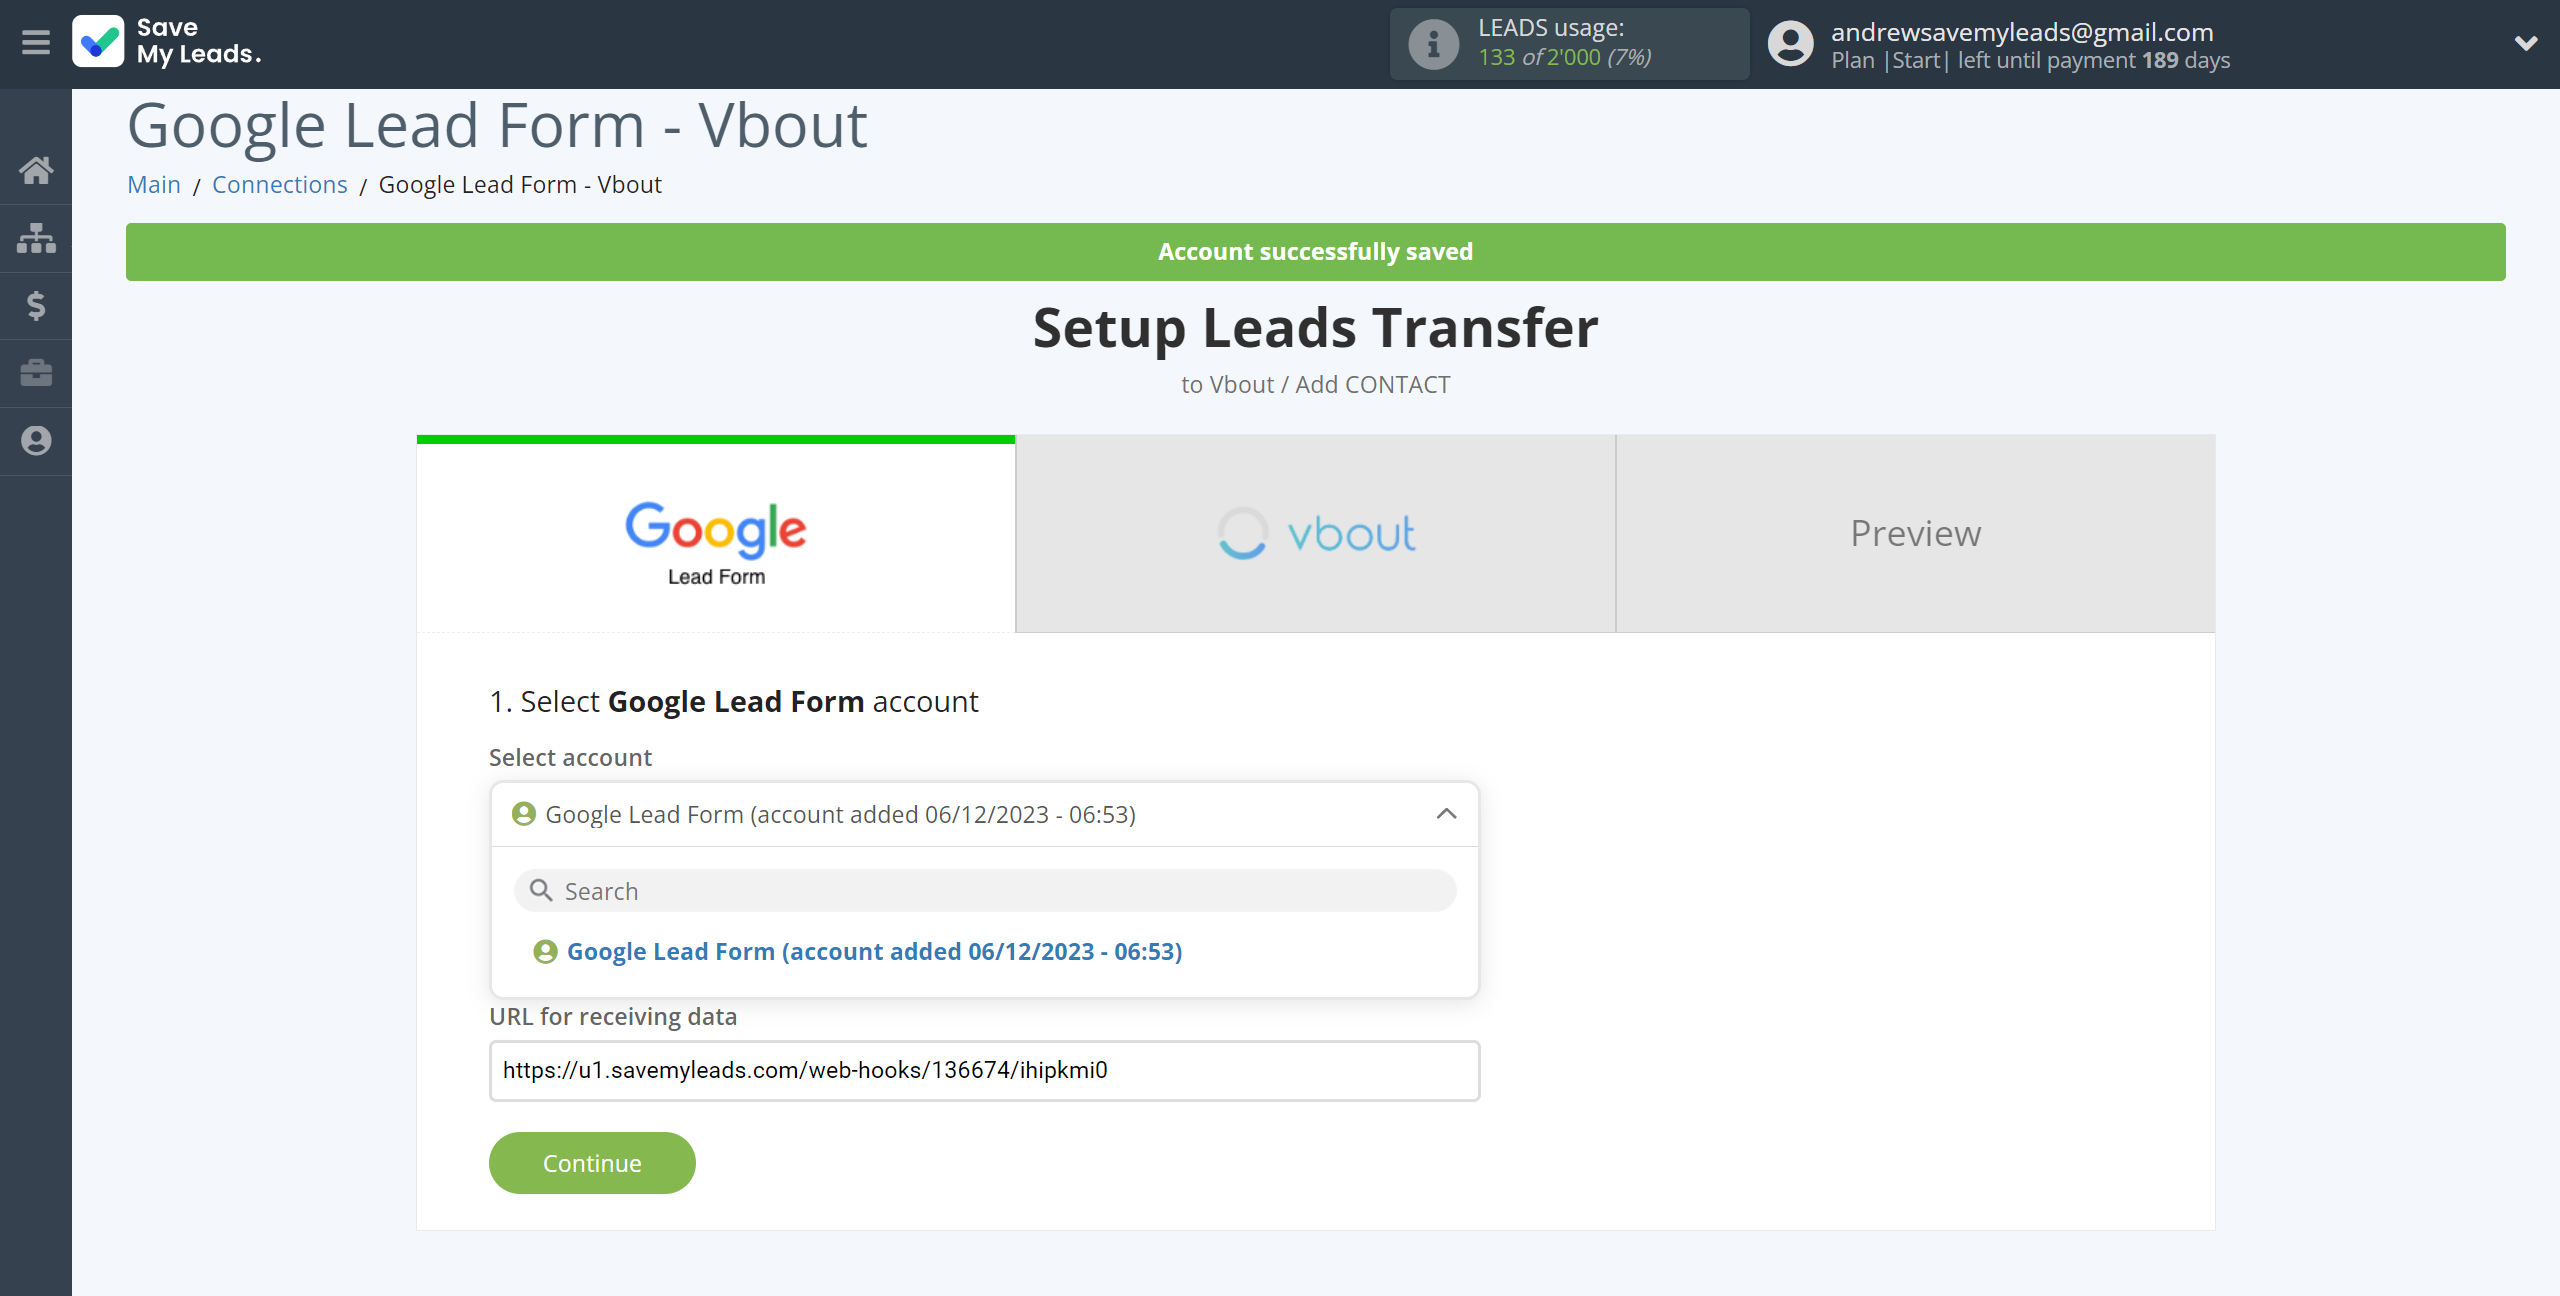 How to Connect Google Lead Form with Vbout Add Contact | Data Source account selection